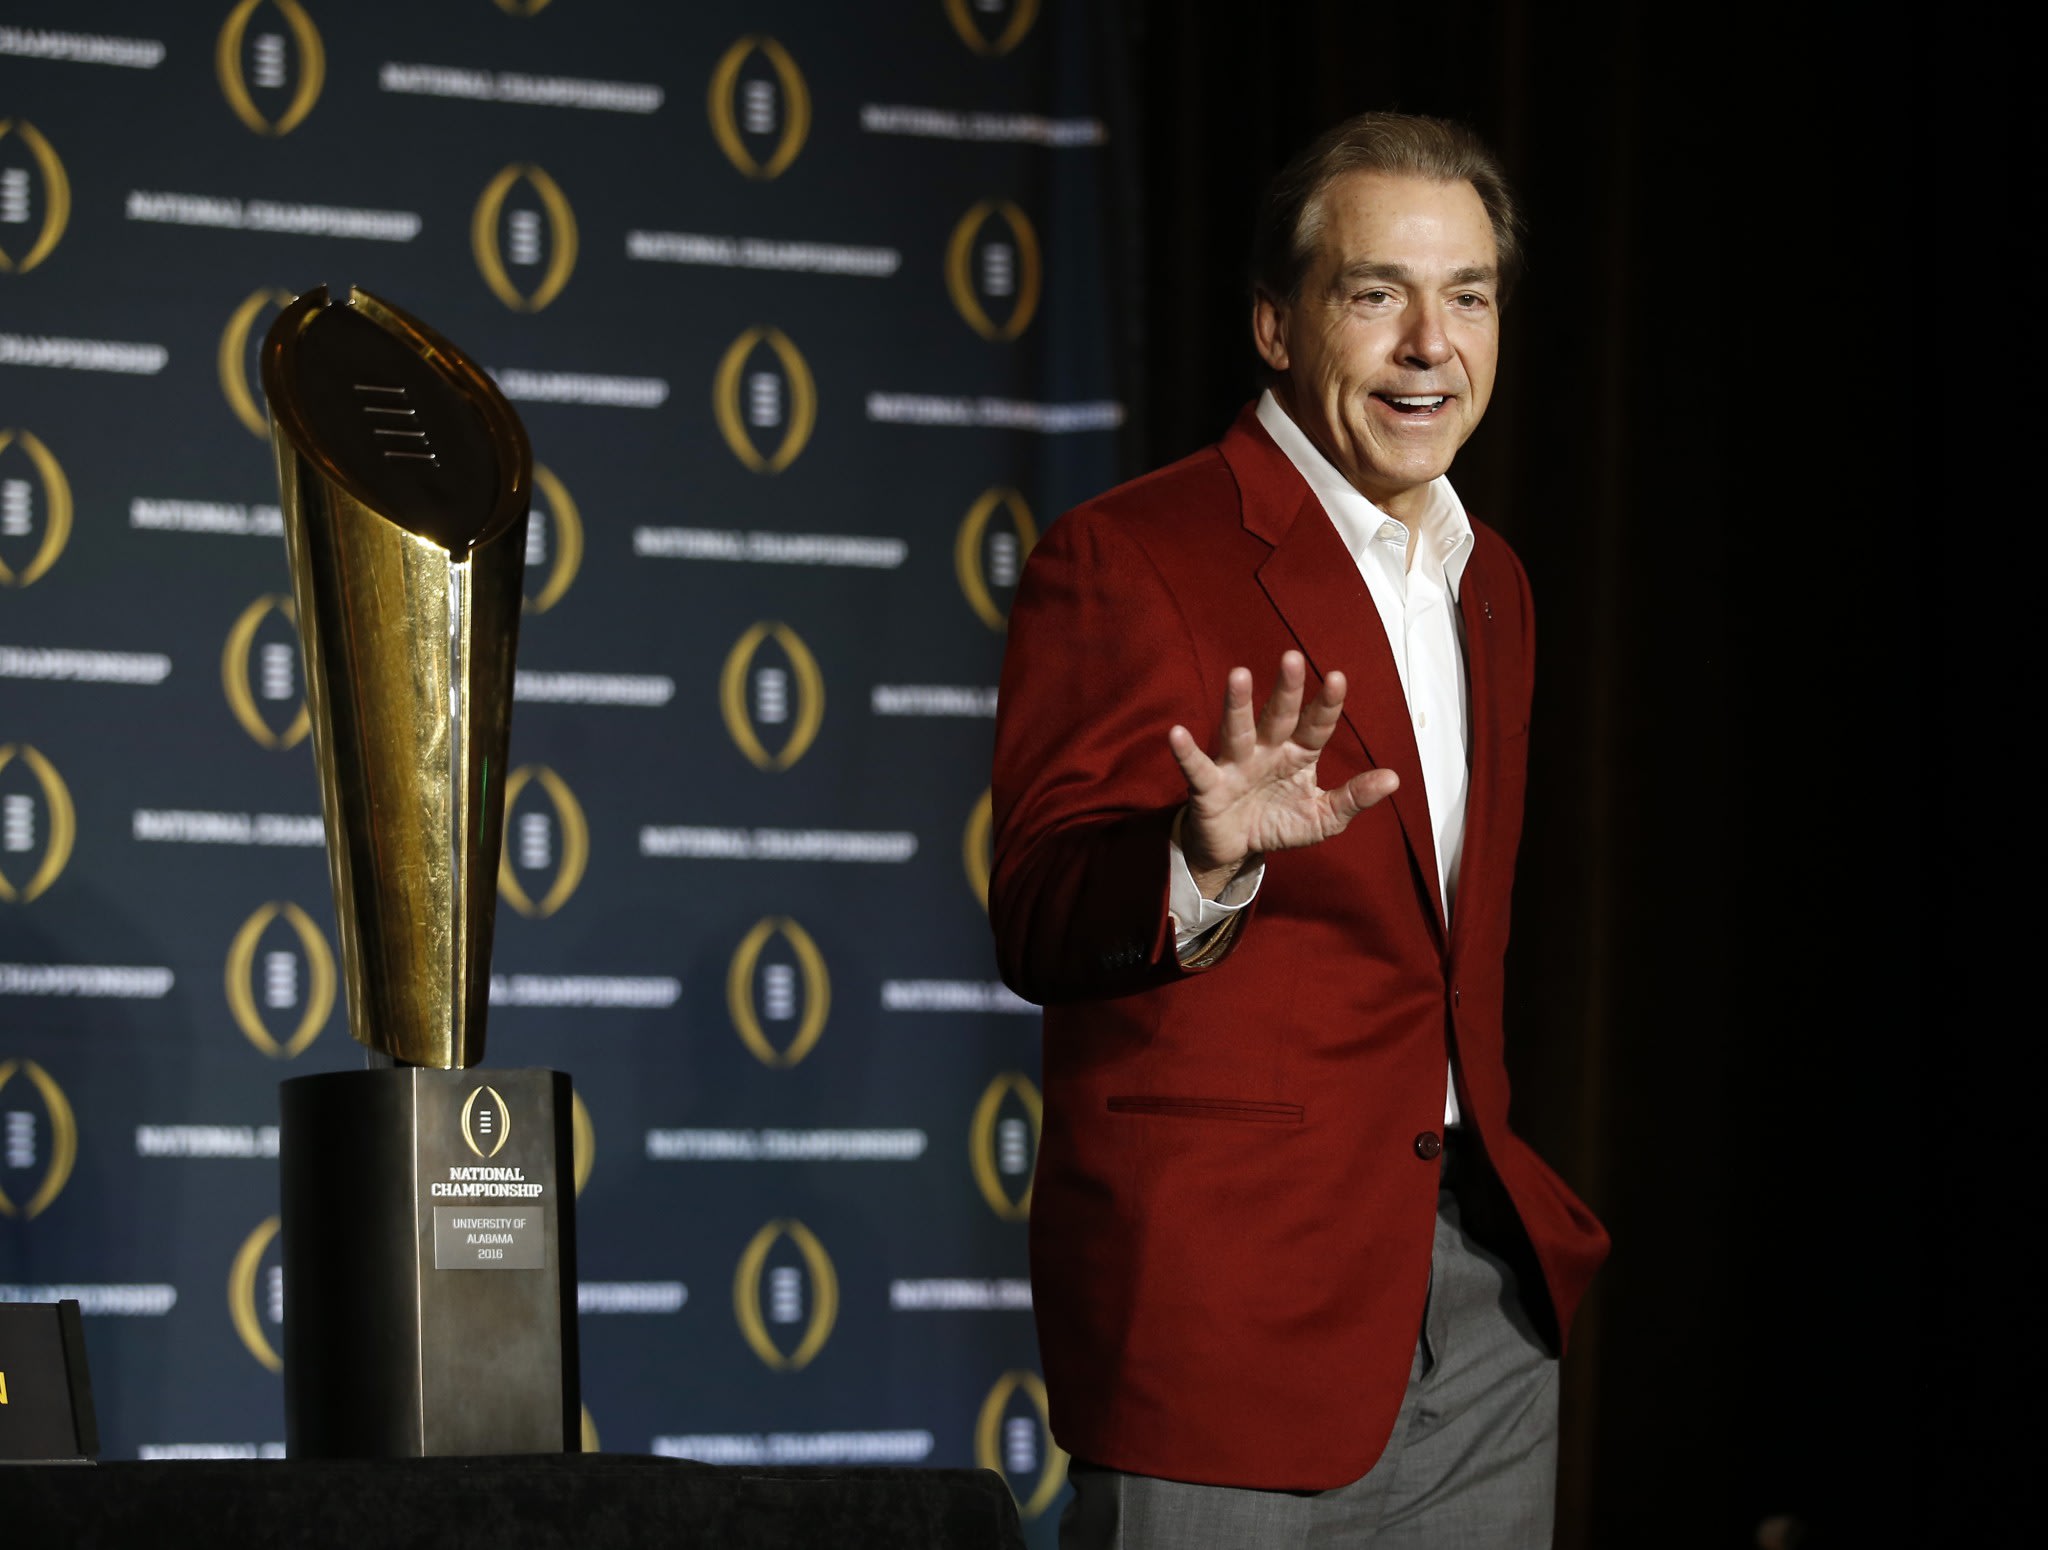 Nick Saban's Alabama squad was picked to repeat as SEC champions. (AP Photo/Morry Gash)